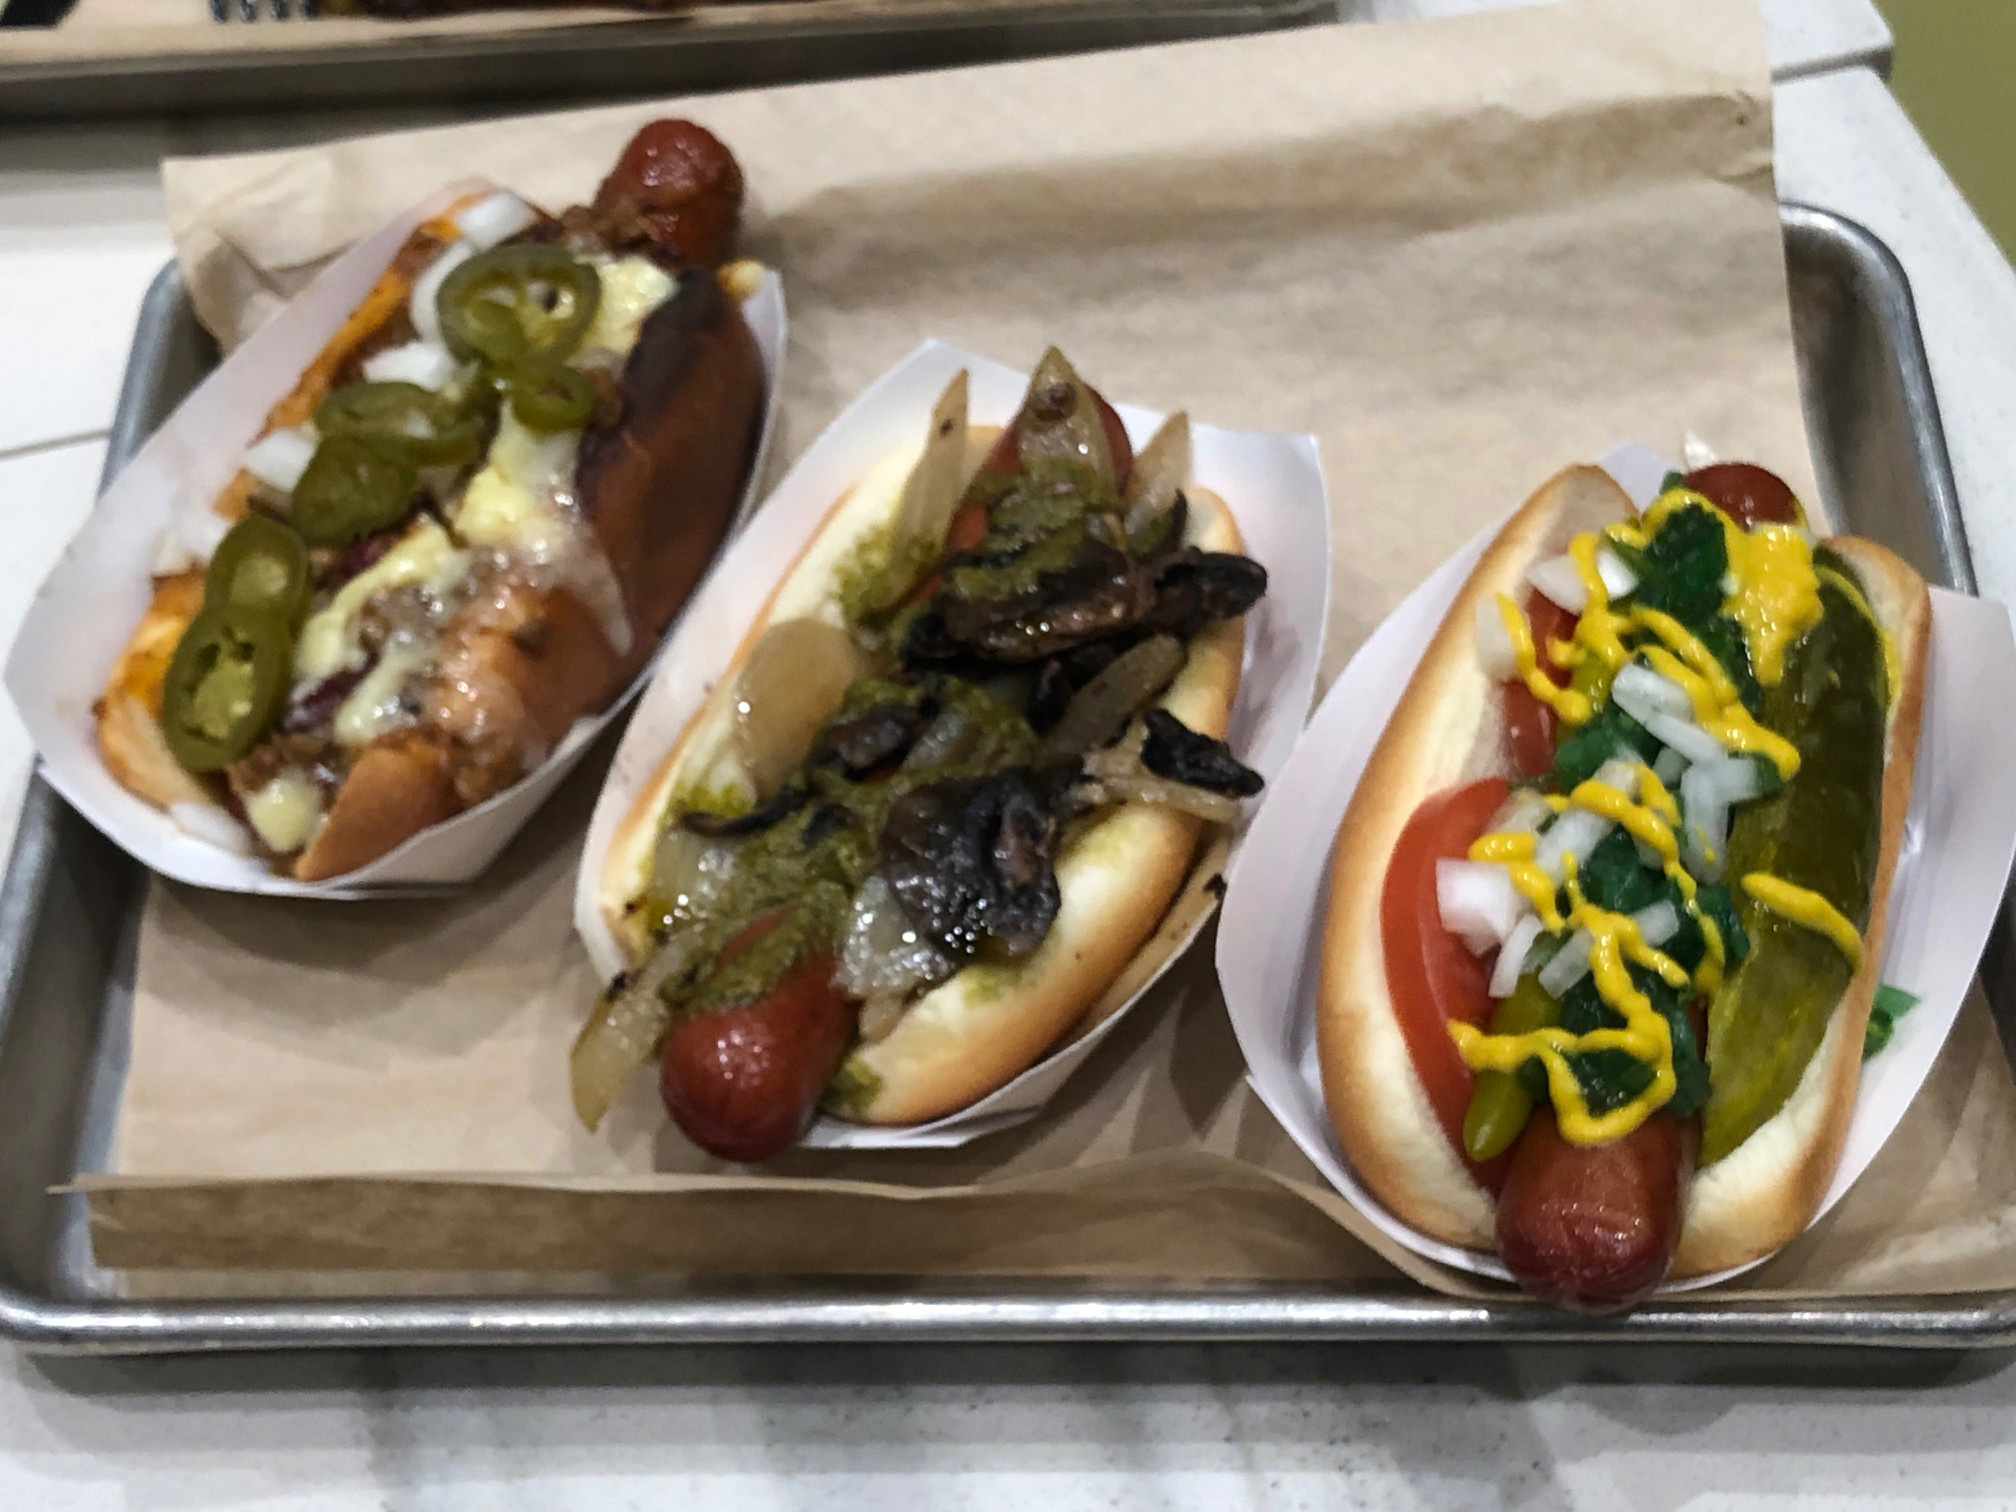 Aficionados of the hotdog will find their wildest fantasies fulfilled at The Deli at Muckleshoot Casino. Photo: Morf Morford